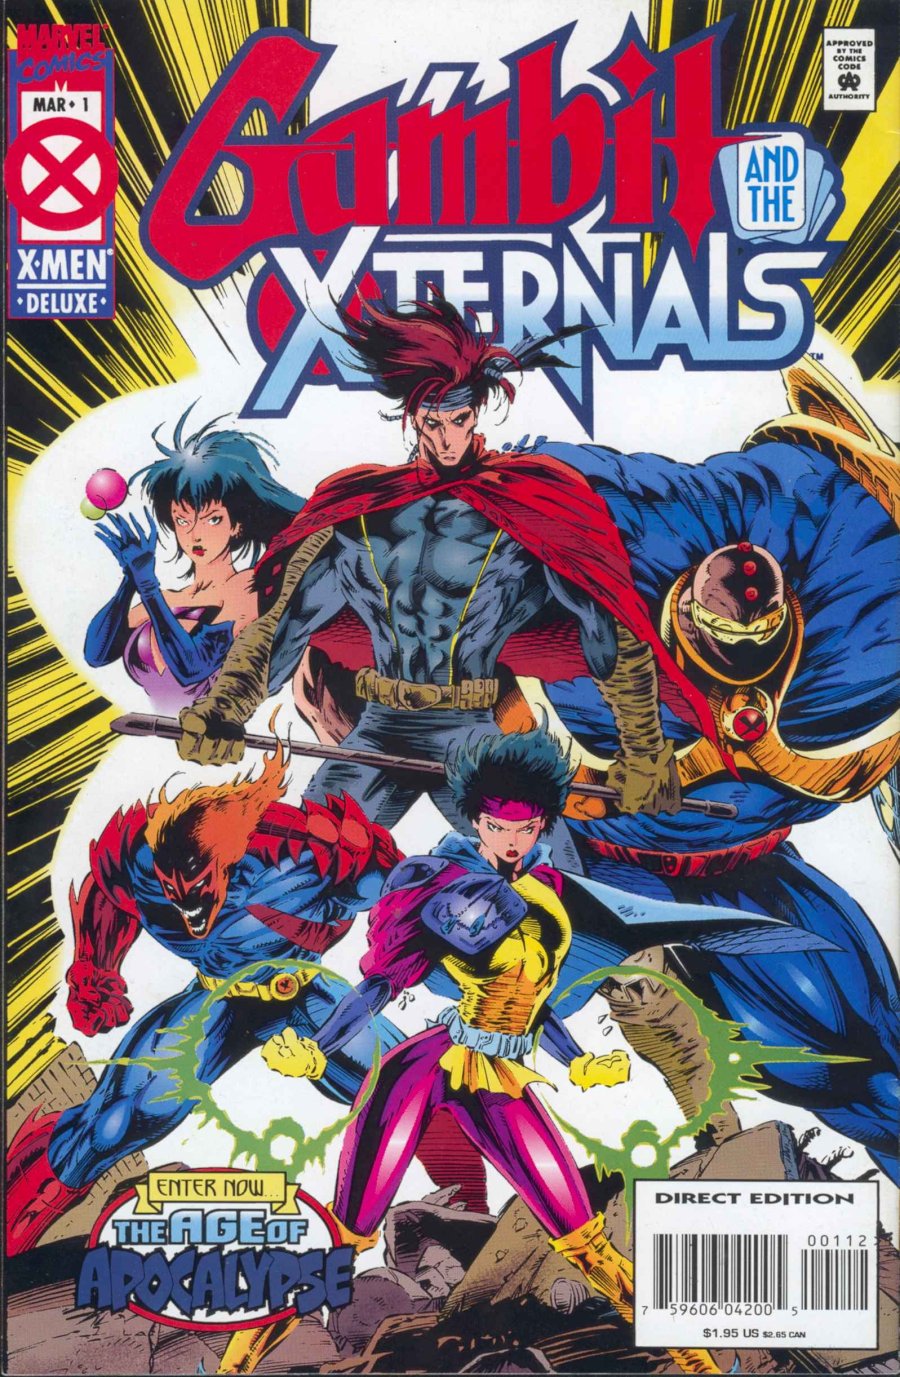 Gambit and the X-Ternals Vol. 1 #1A